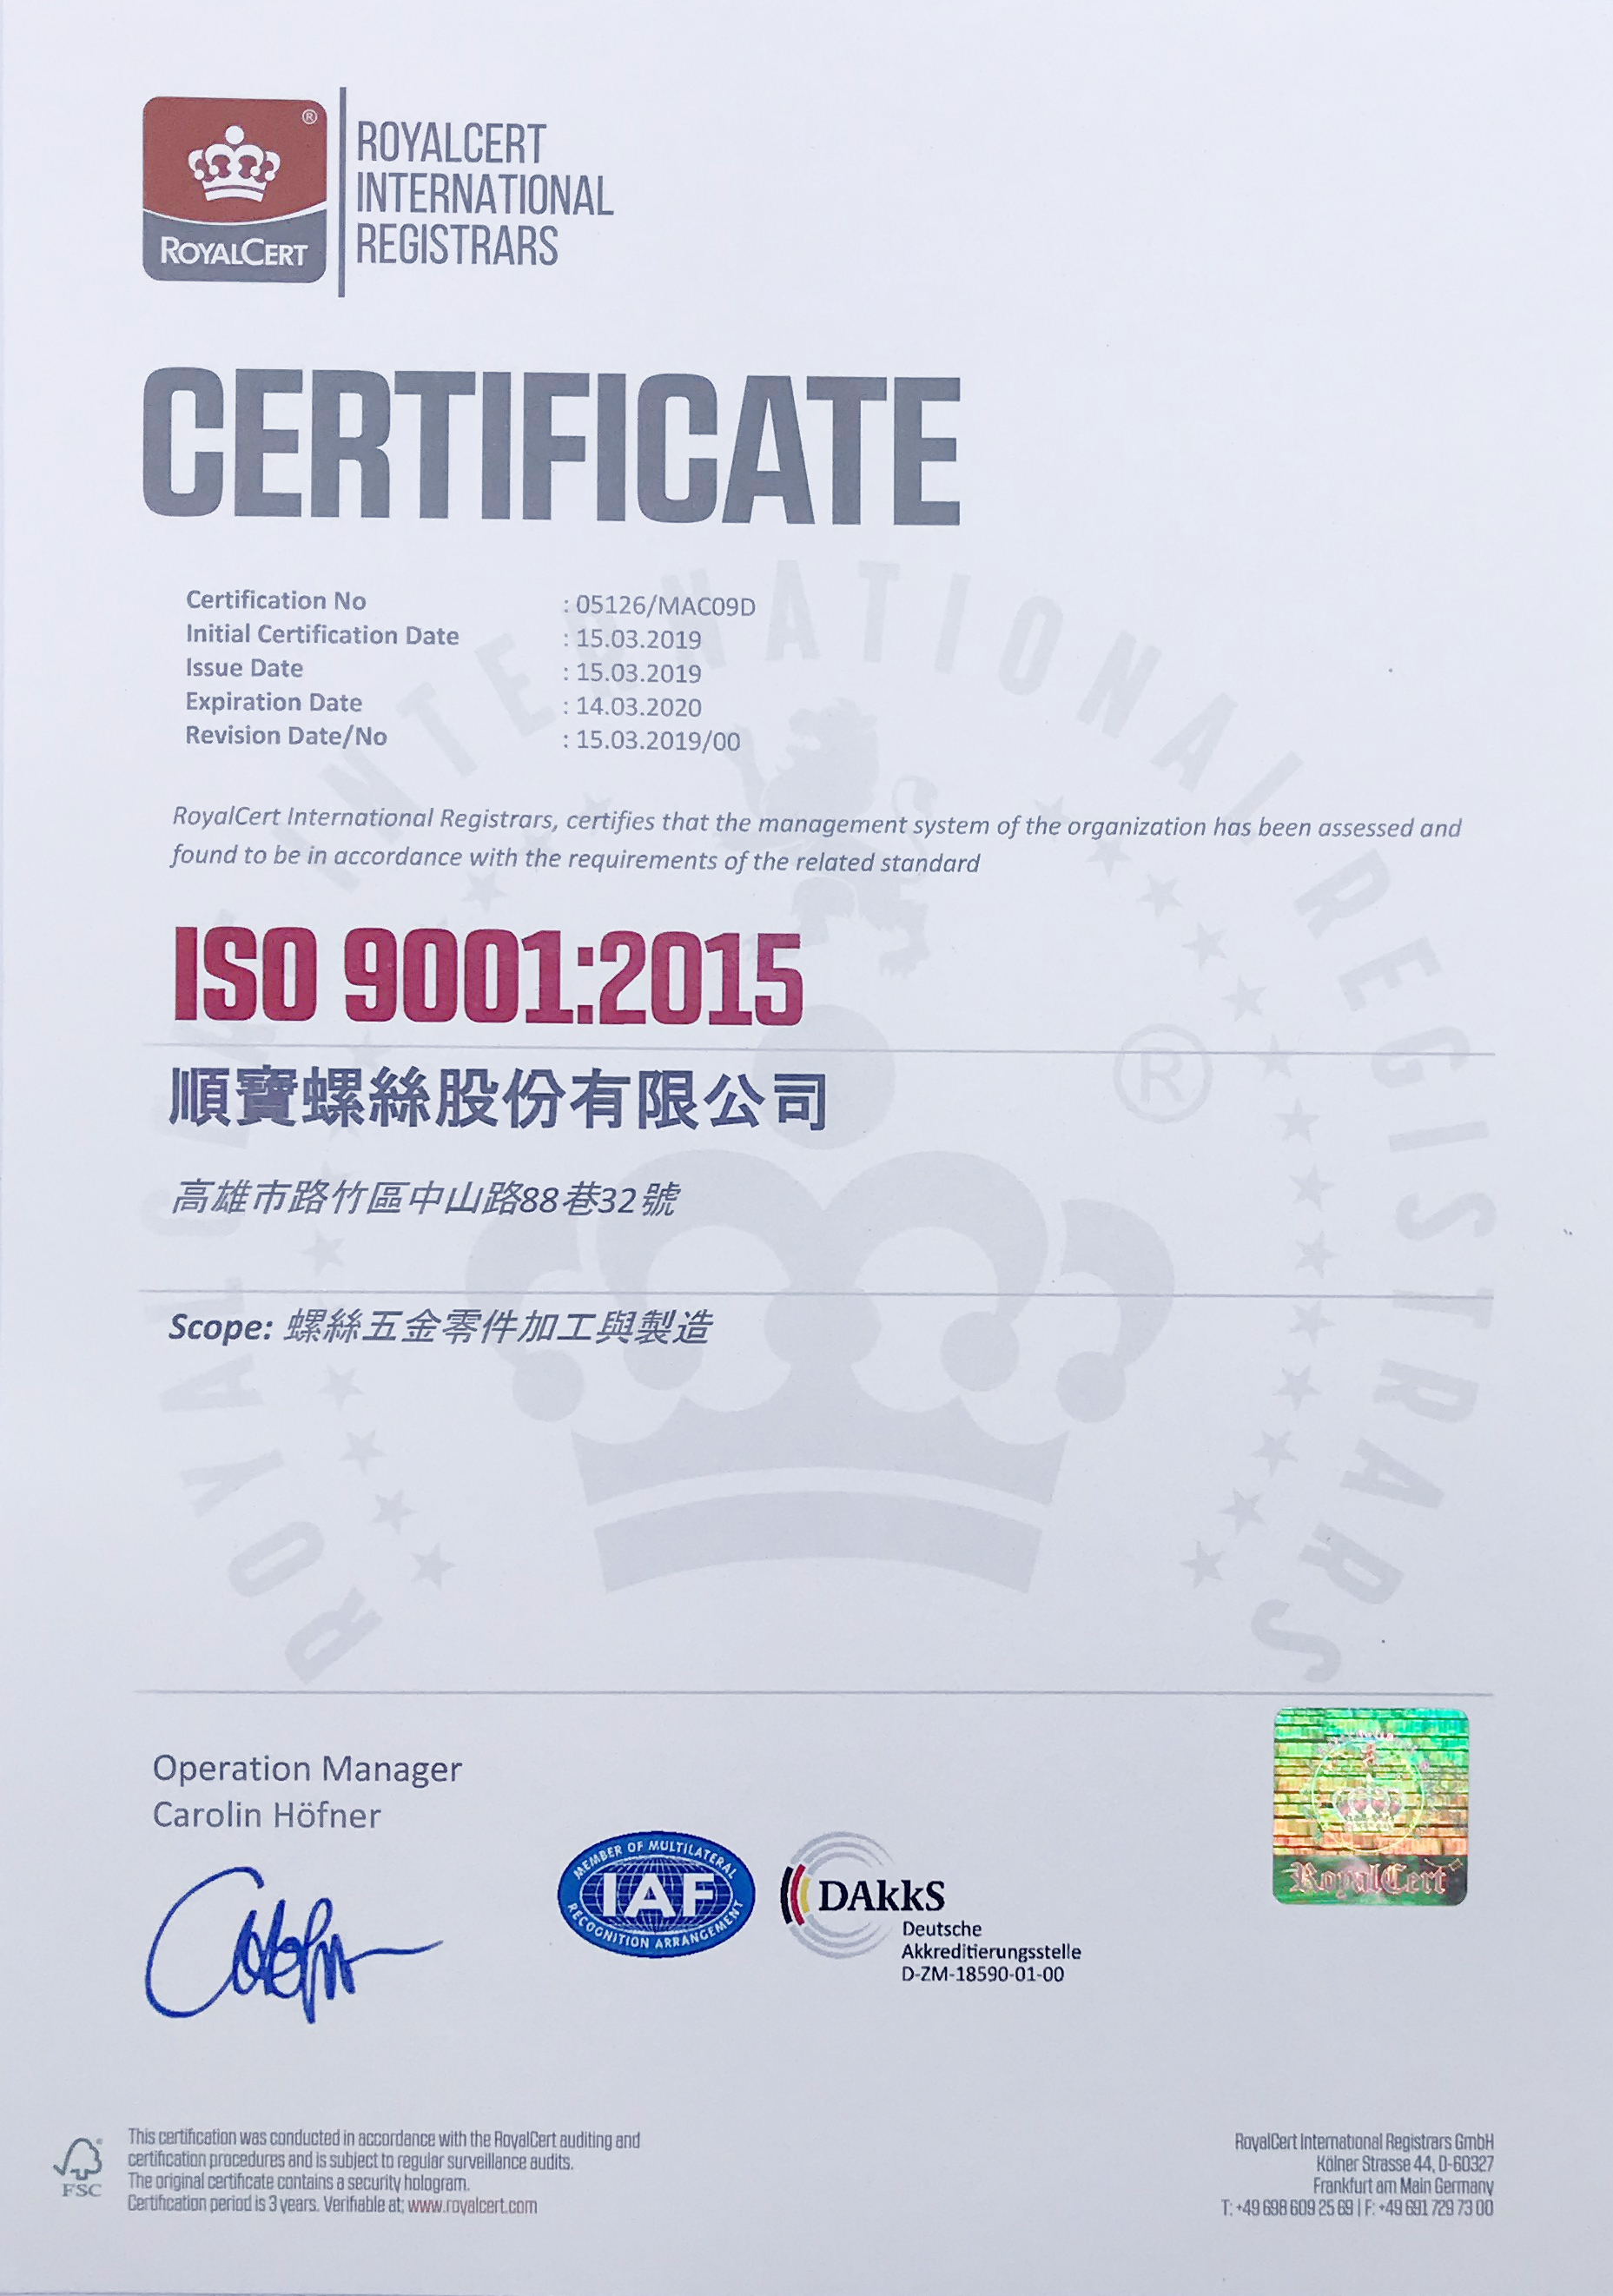 We obtained ISO 9001:2015 CERTIFICATION